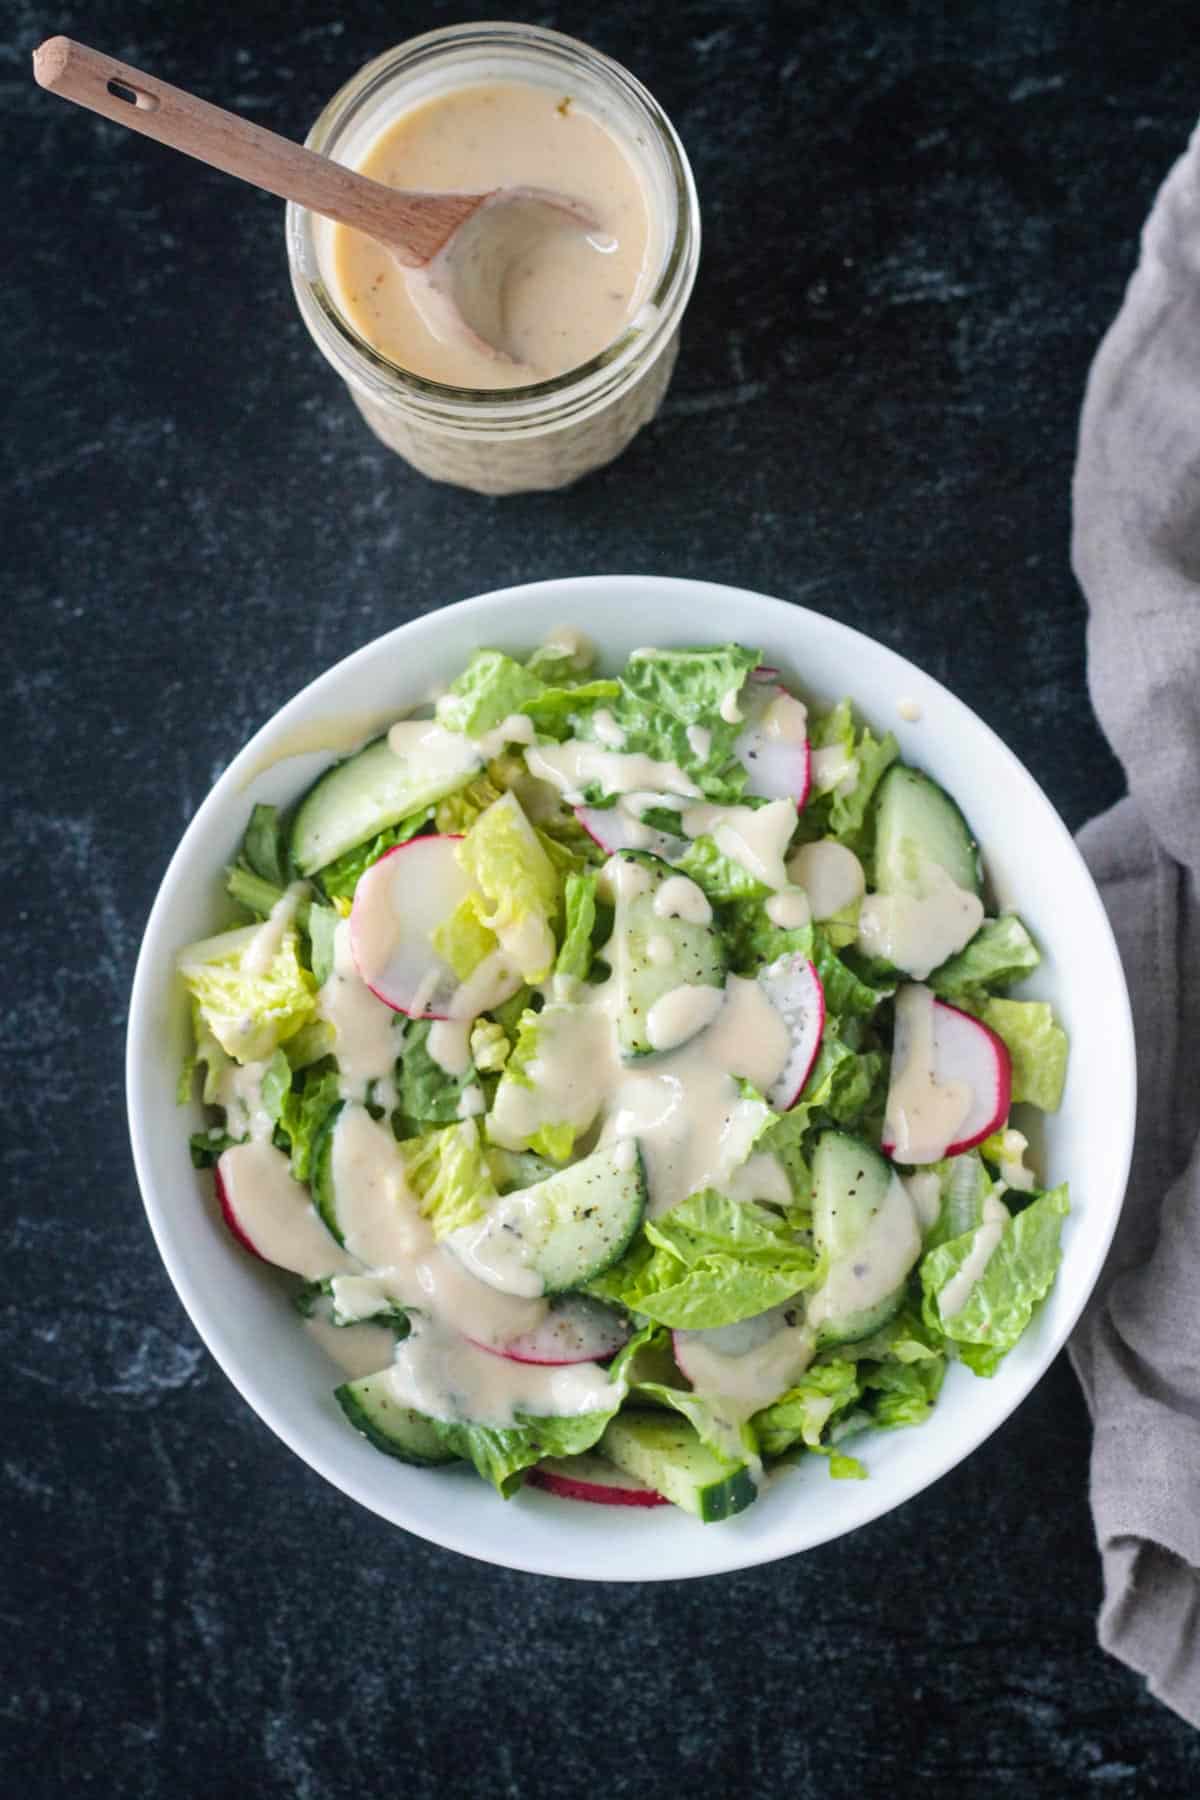 Hummus dressing in a jar next to a bowl of salad.